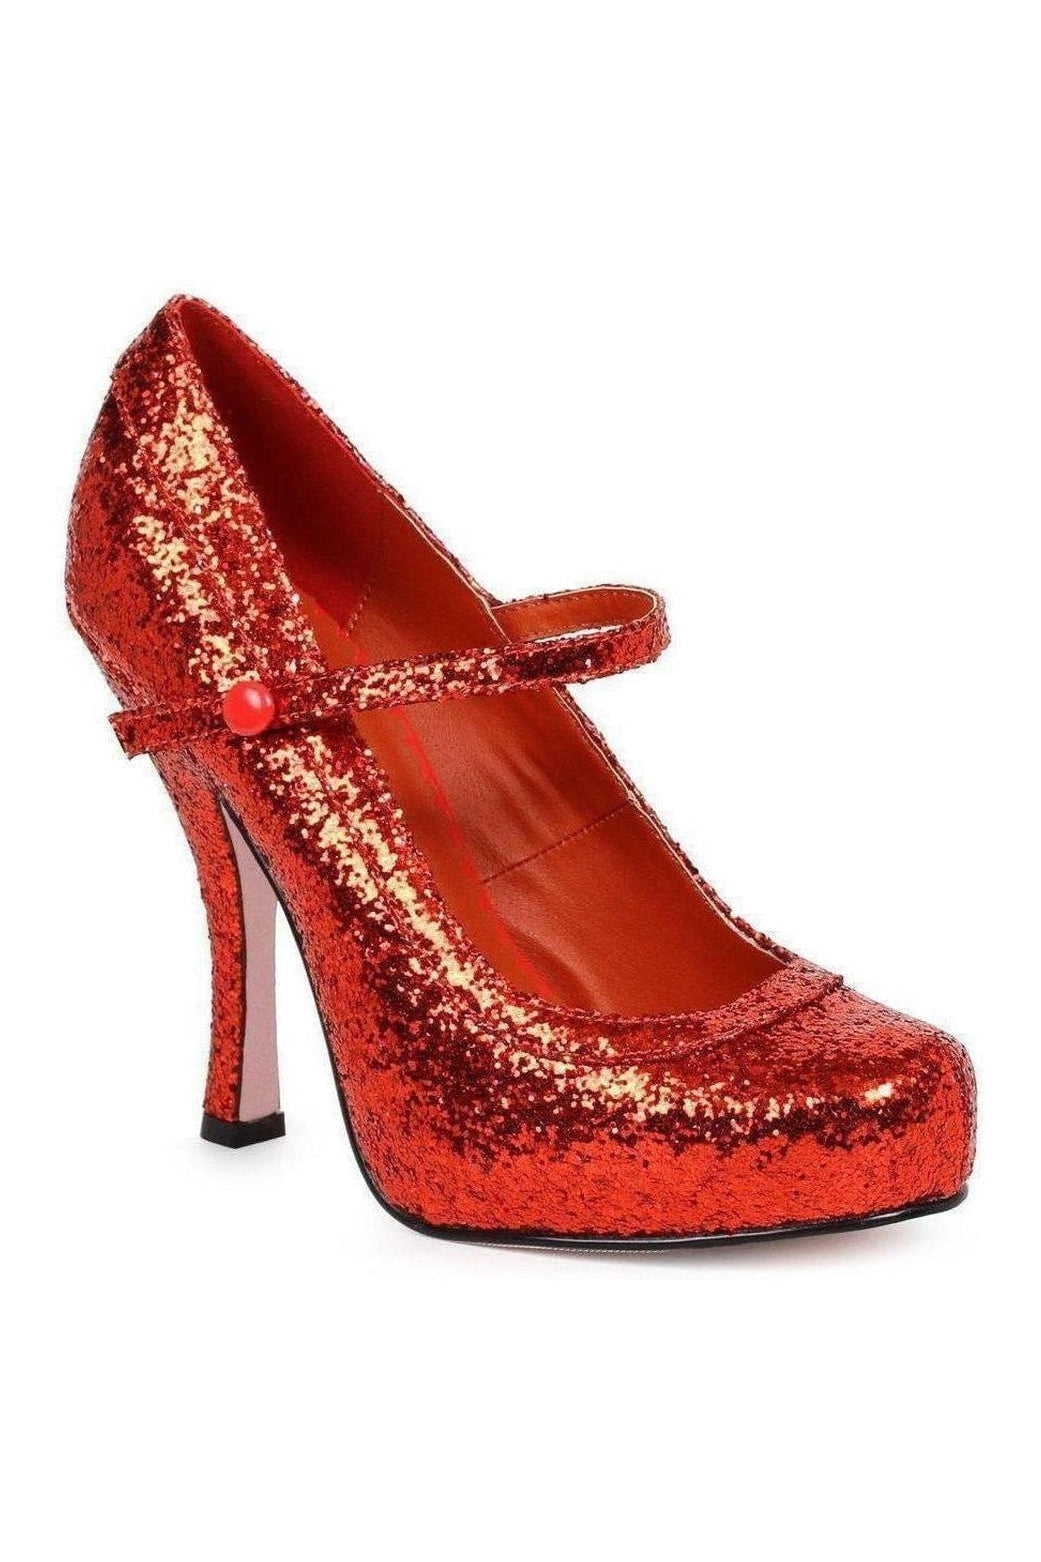 423-CANDY Costume Pump | Red Glitter-Ellie Shoes-SEXYSHOES.COM